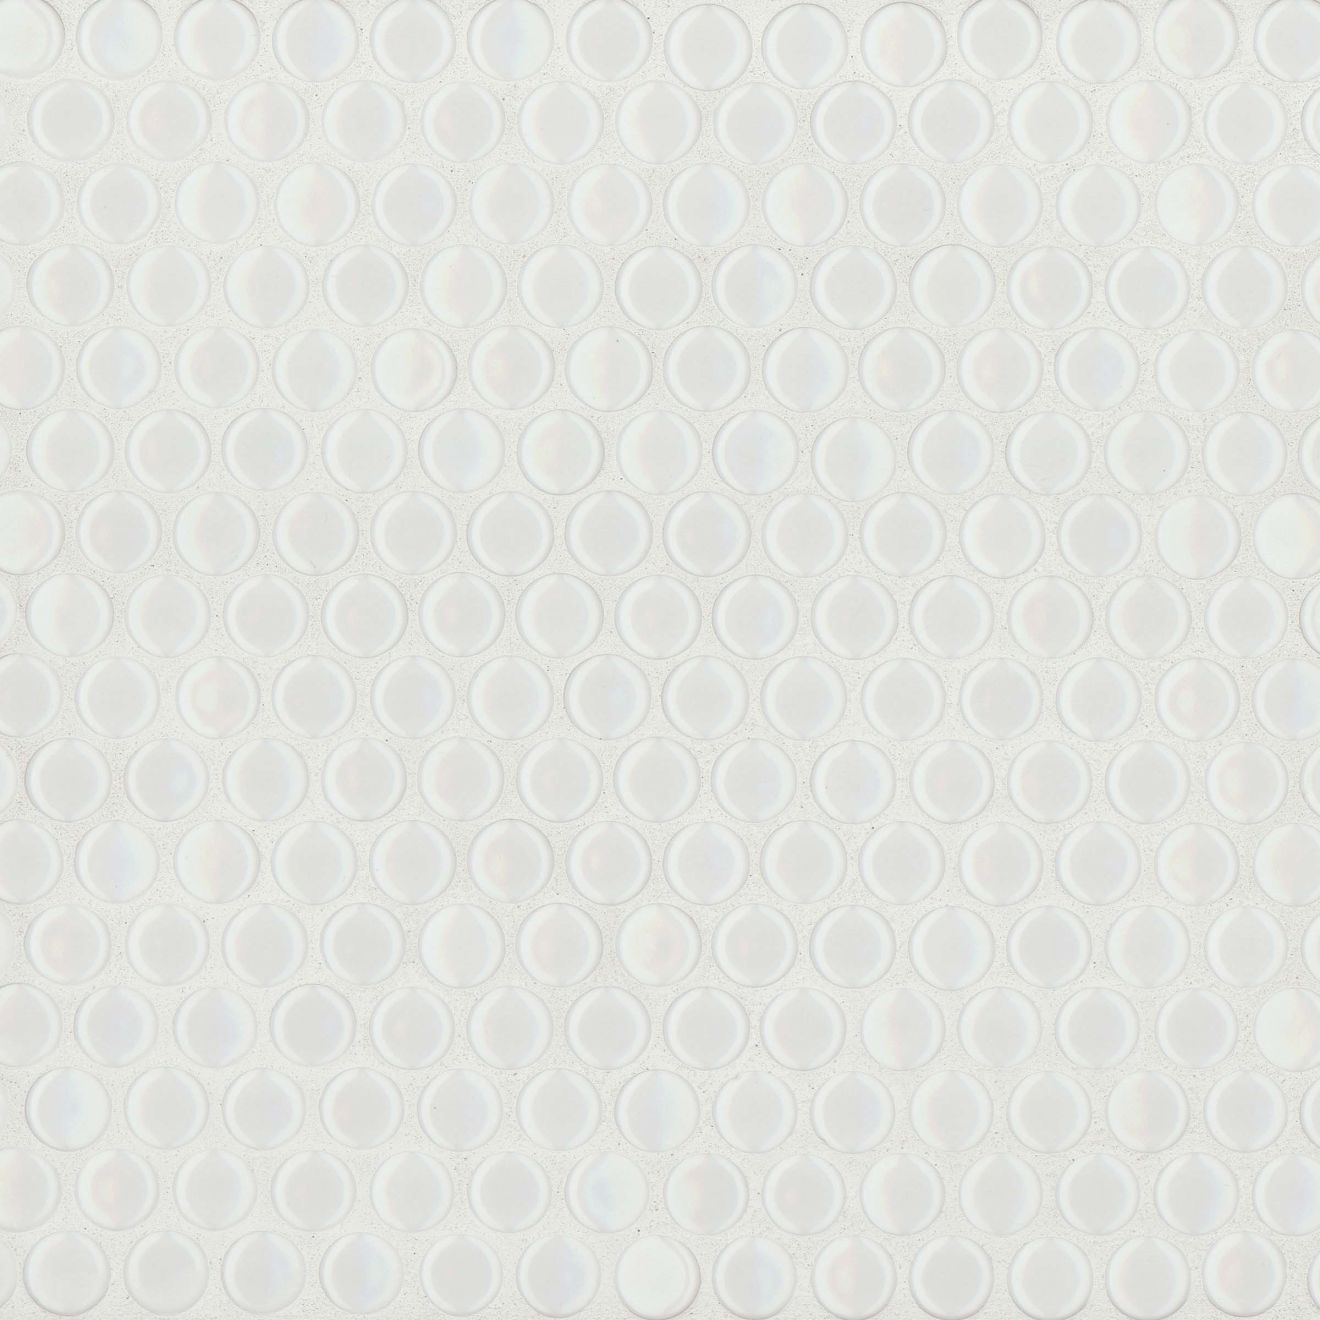 360 3/4" x 3/4" Penny Round Glossy Mosaic Tile in White